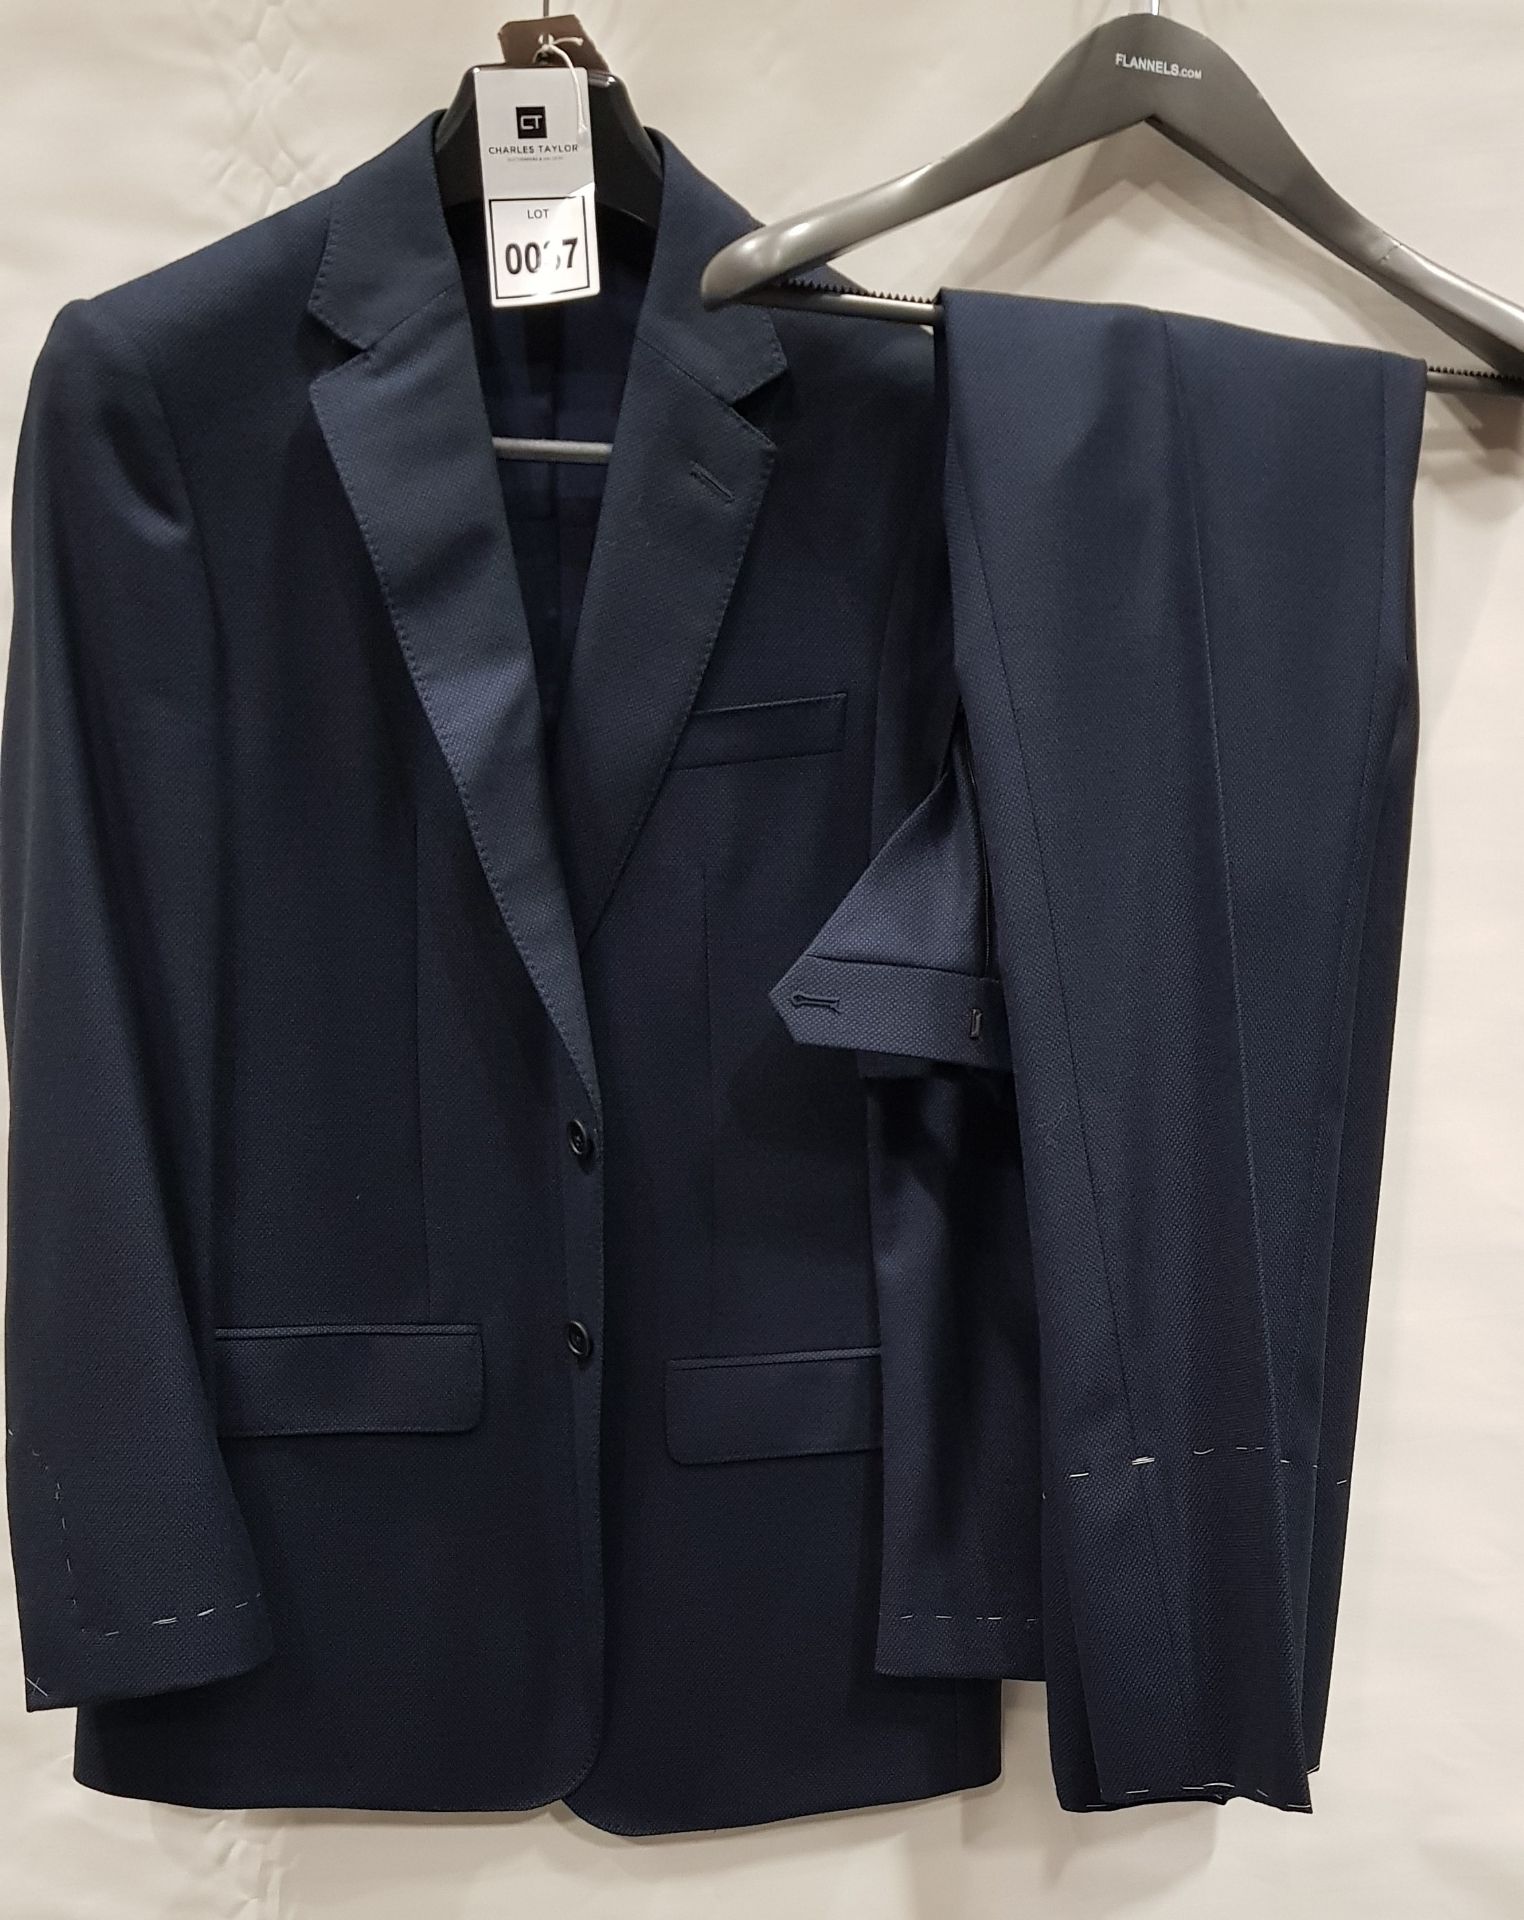 3 X BRAND NEW LUTWYCHE 2 PC DARK BLUE SHADES MATCHING SUITS SIZES 40R, 46R, 44L (NOTE NOT FULLY